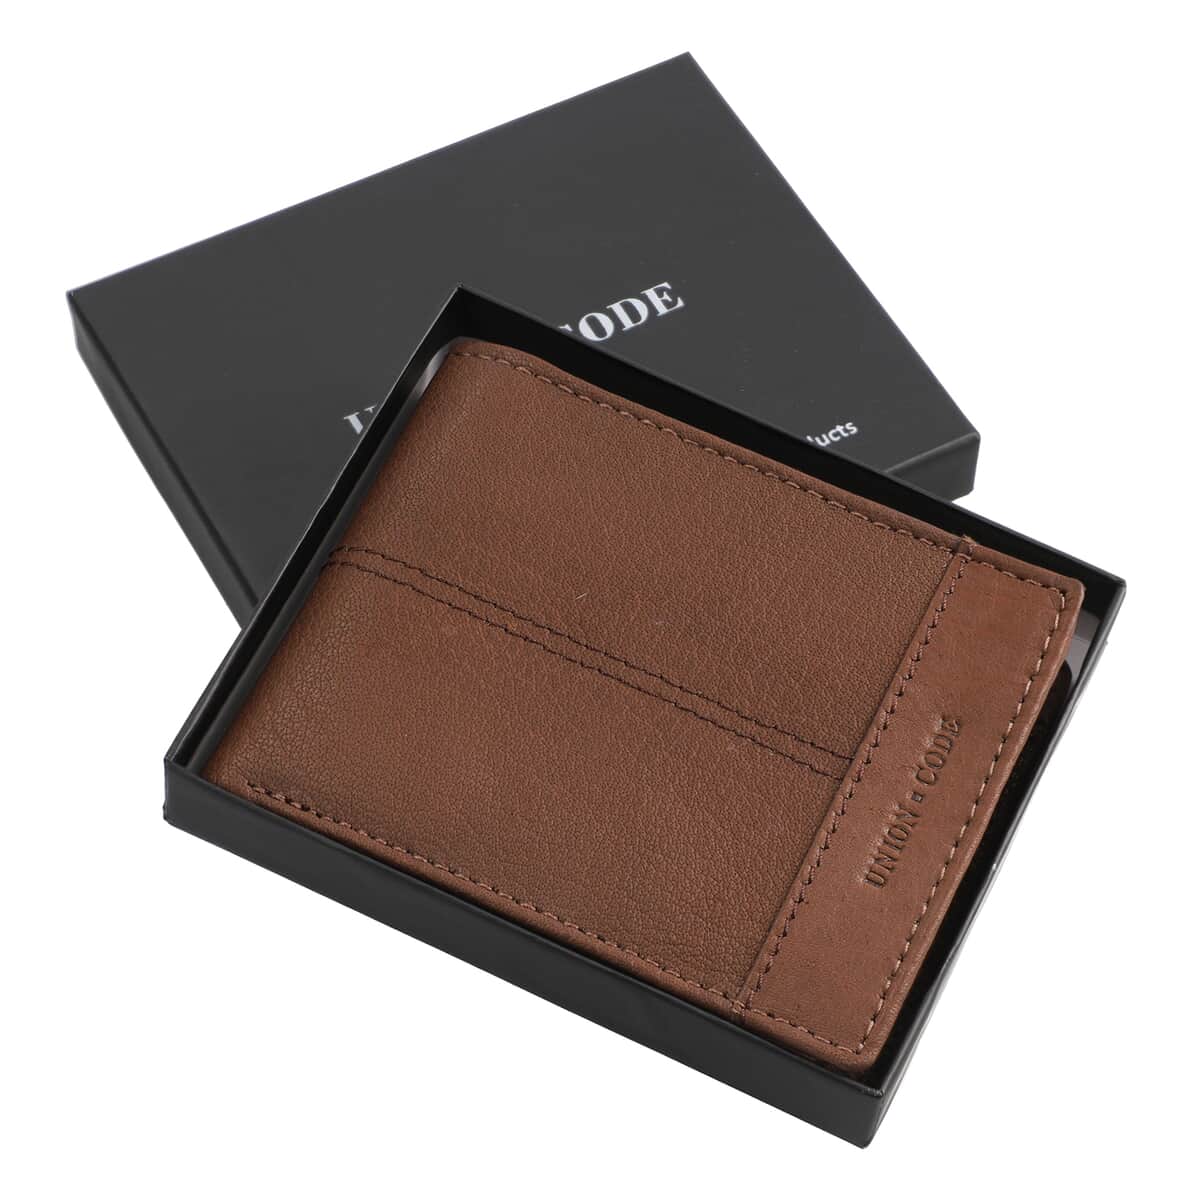 "UNION CODE Genuine Leather Bi Fold Men's Wallet (RFID Protected) SIZE: 4.25(L)x3.25(H) inches COLOR: Black" image number 6